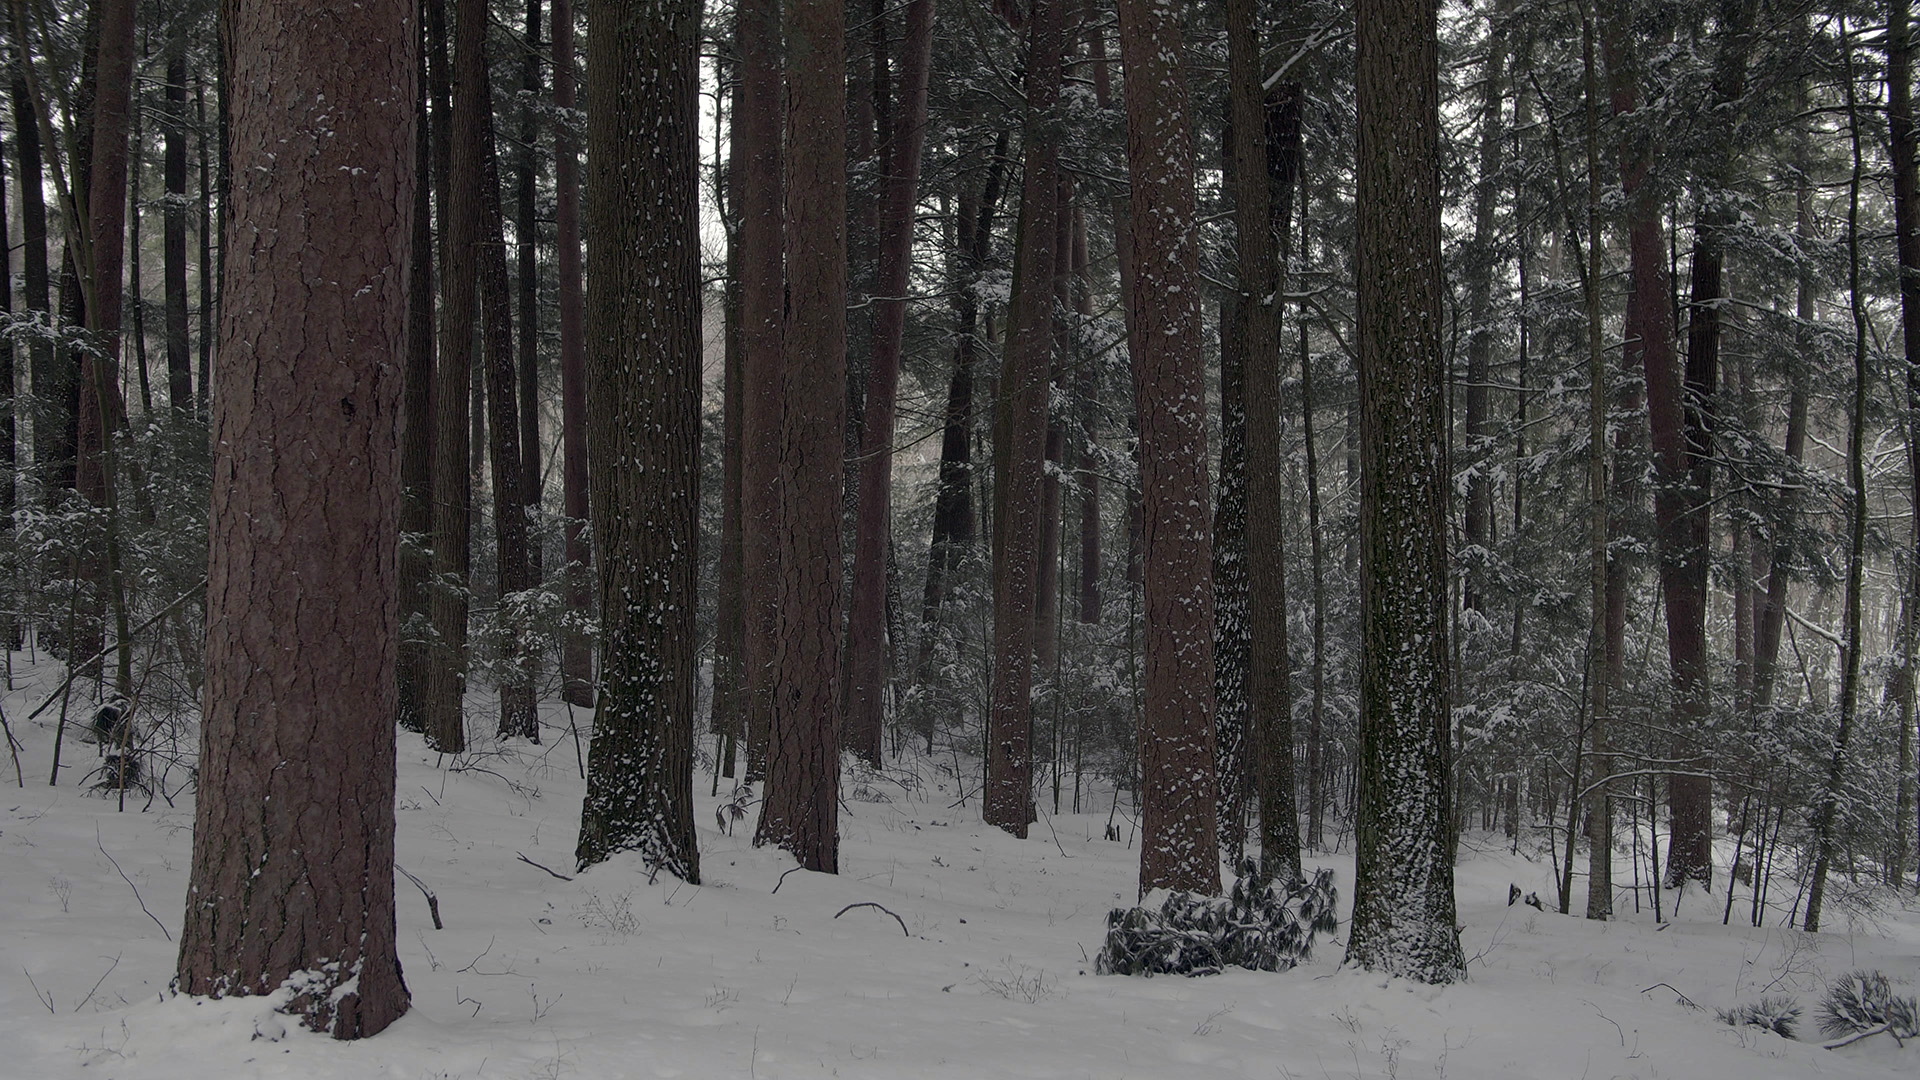 A dense stand of pine trees with snow-flecked trunks stand in a winter landscape.